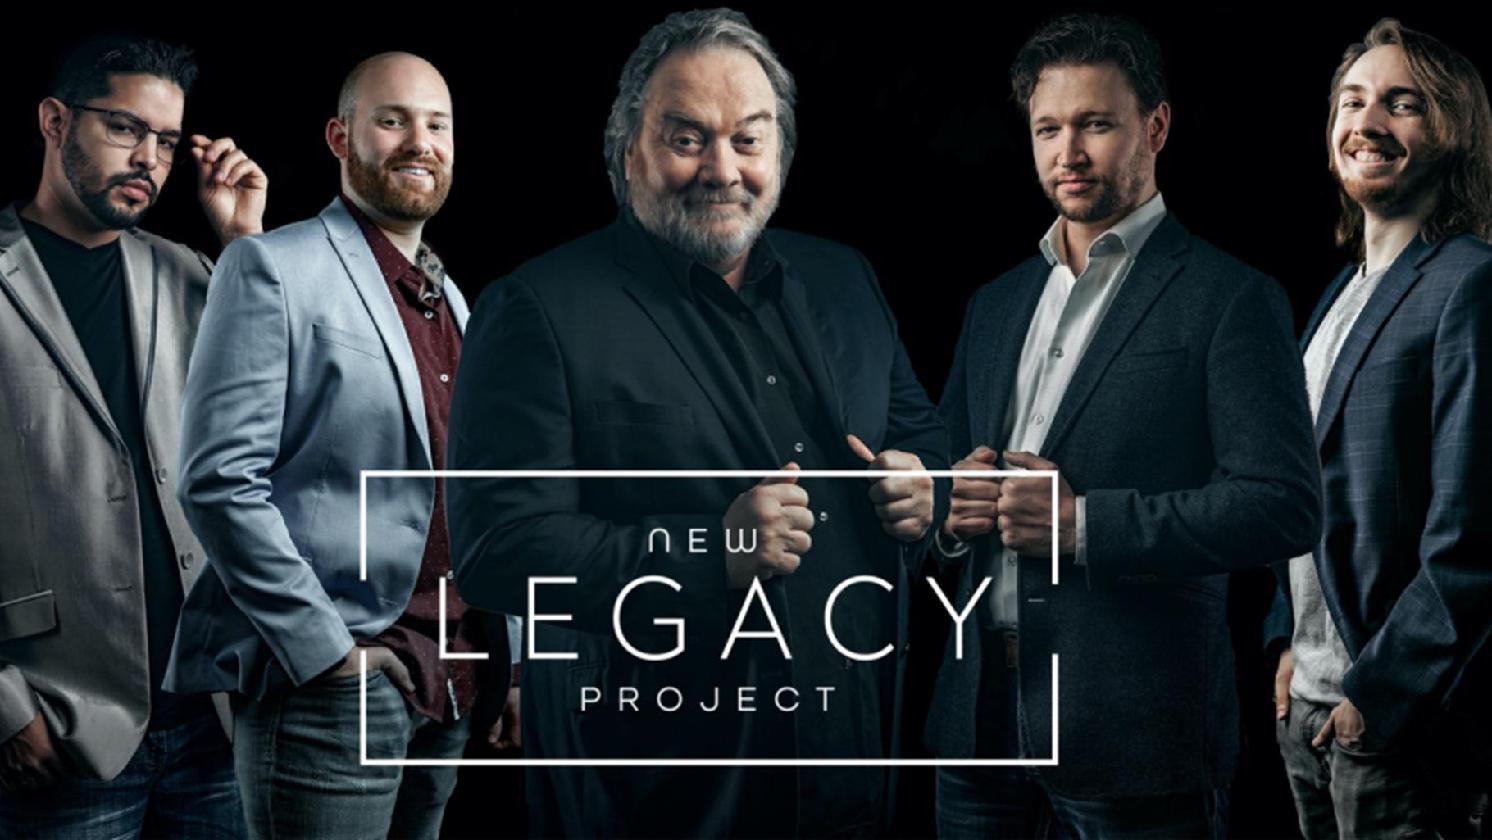 Live Concert in Merced with Nashville's Finest Men's Vocal Band - New Legacy Project!